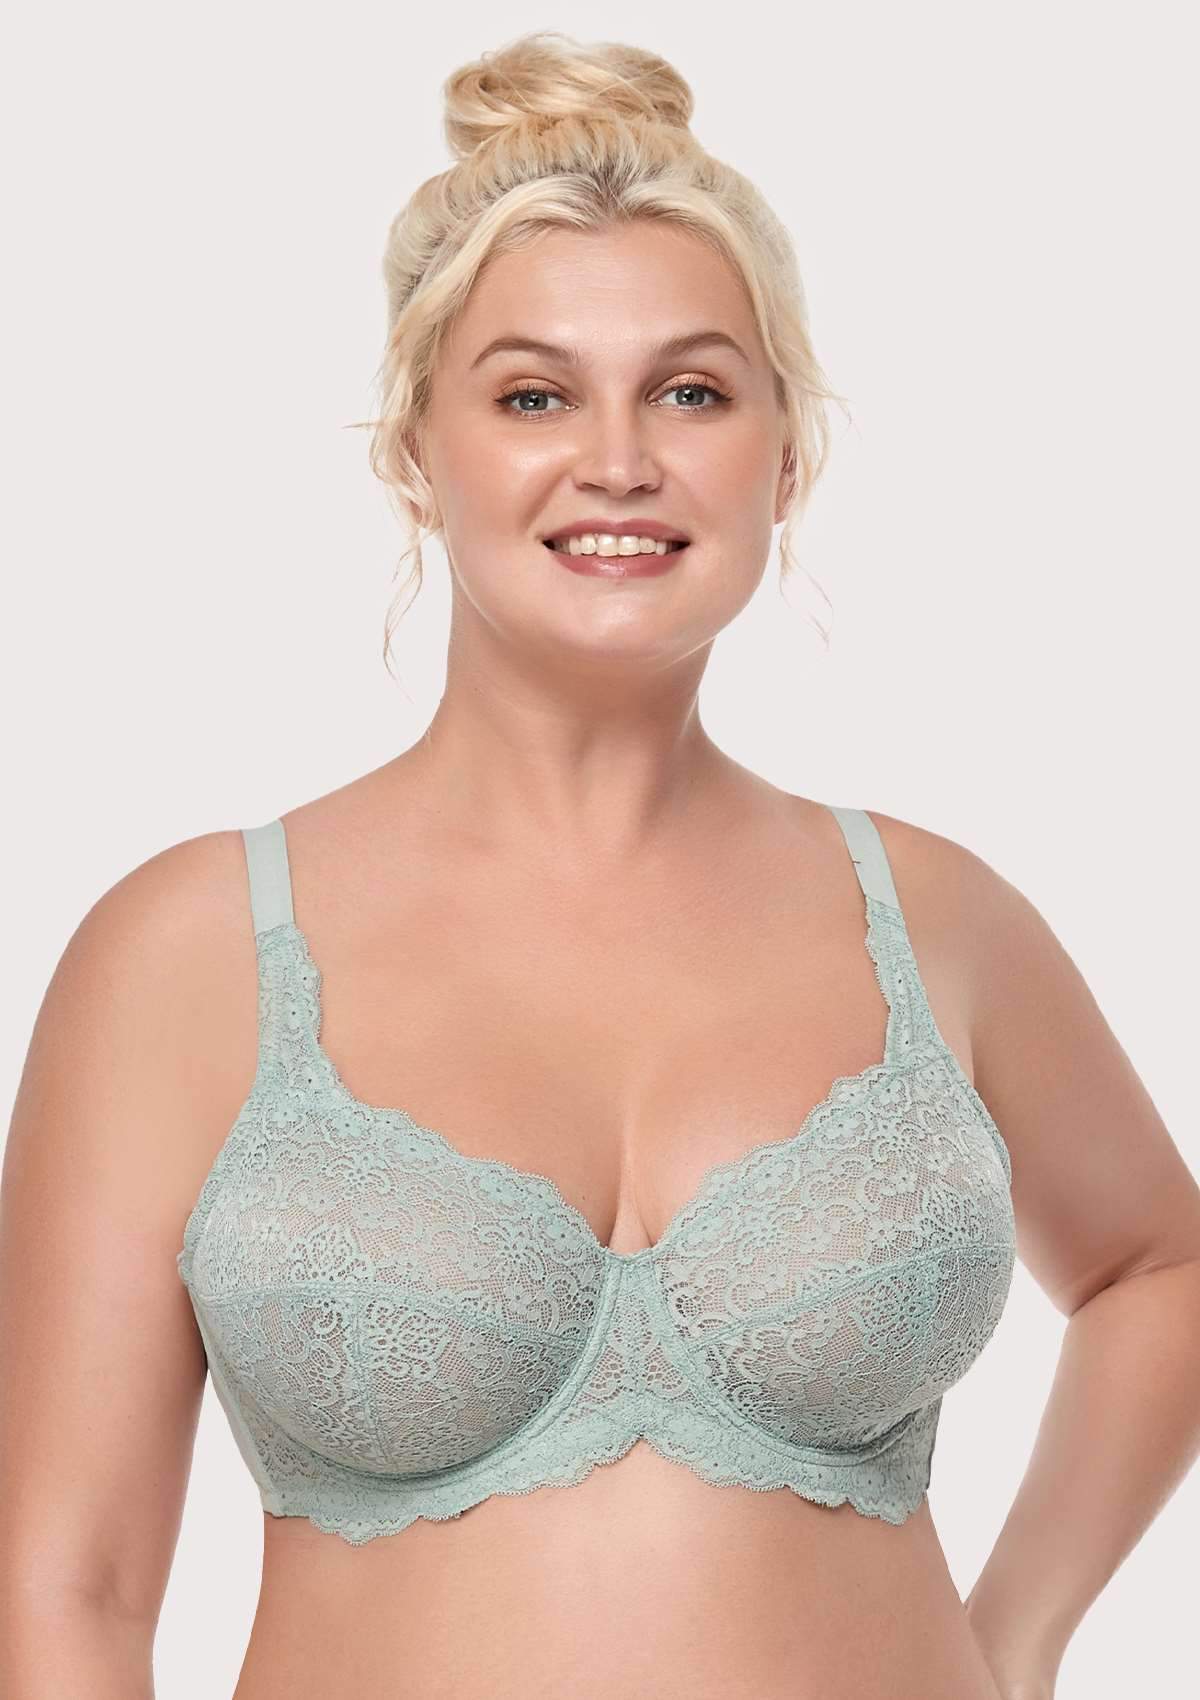 HSIA All-Over Floral Lace: Best Bra For Elderly With Sagging Breasts - Crystal Blue / 36 / C